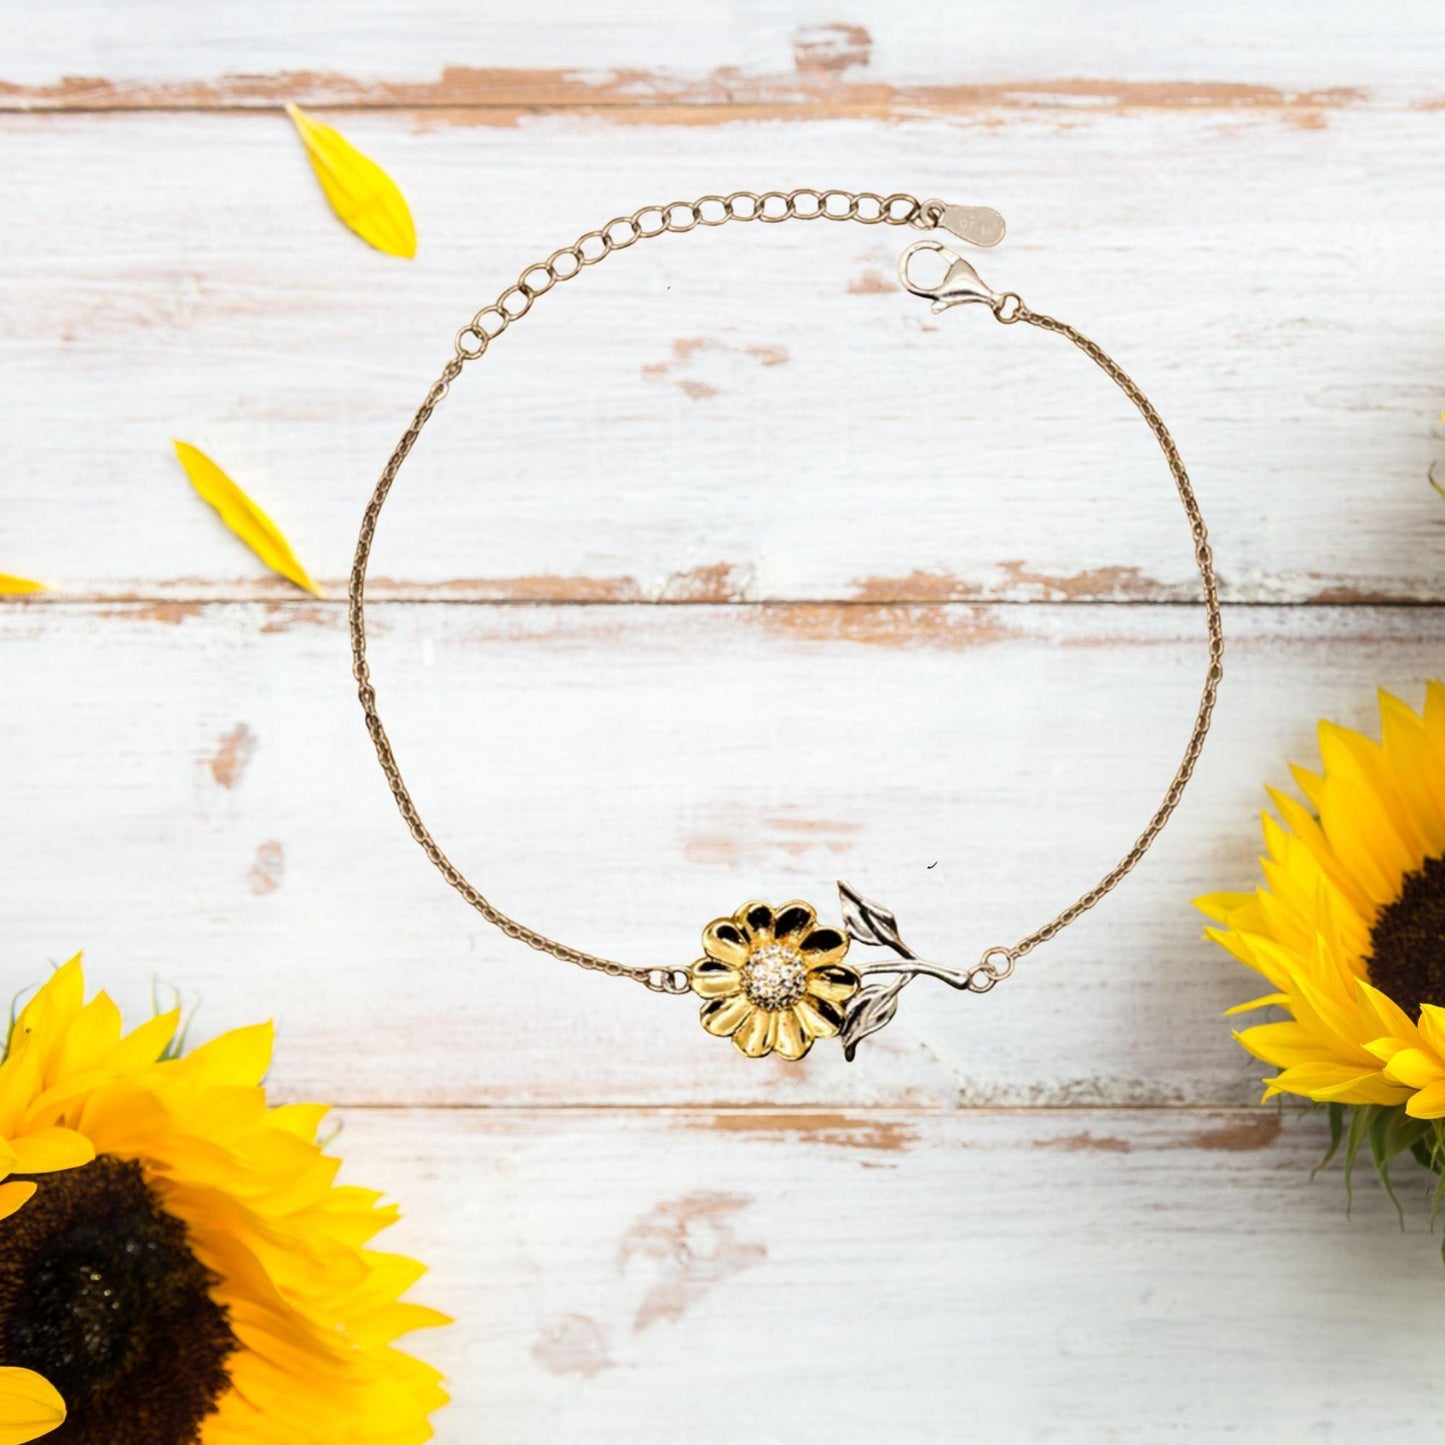 Physician Sunflower Bracelet - Thanks for being who you are - Birthday Christmas Jewelry Gifts Coworkers Colleague Boss - Mallard Moon Gift Shop